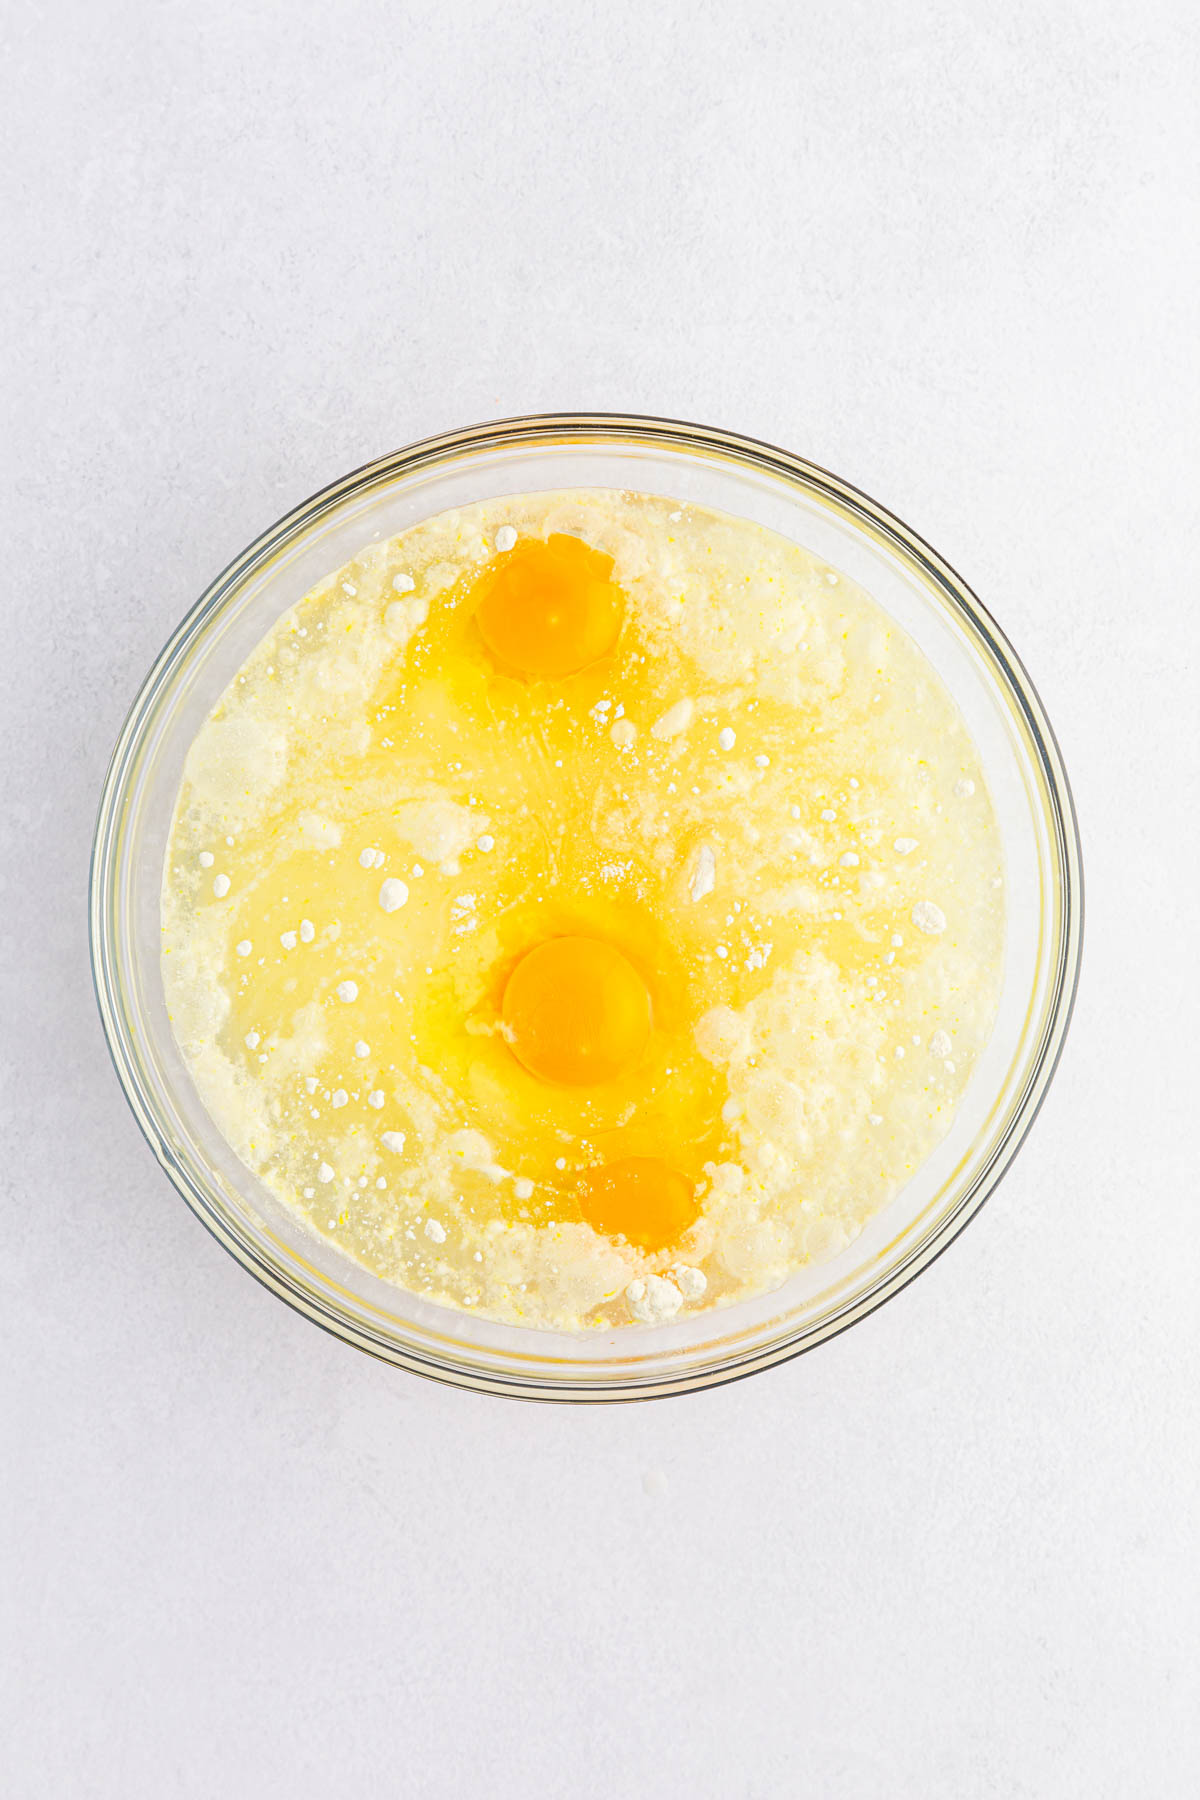 Cake mix with eggs, oil and water